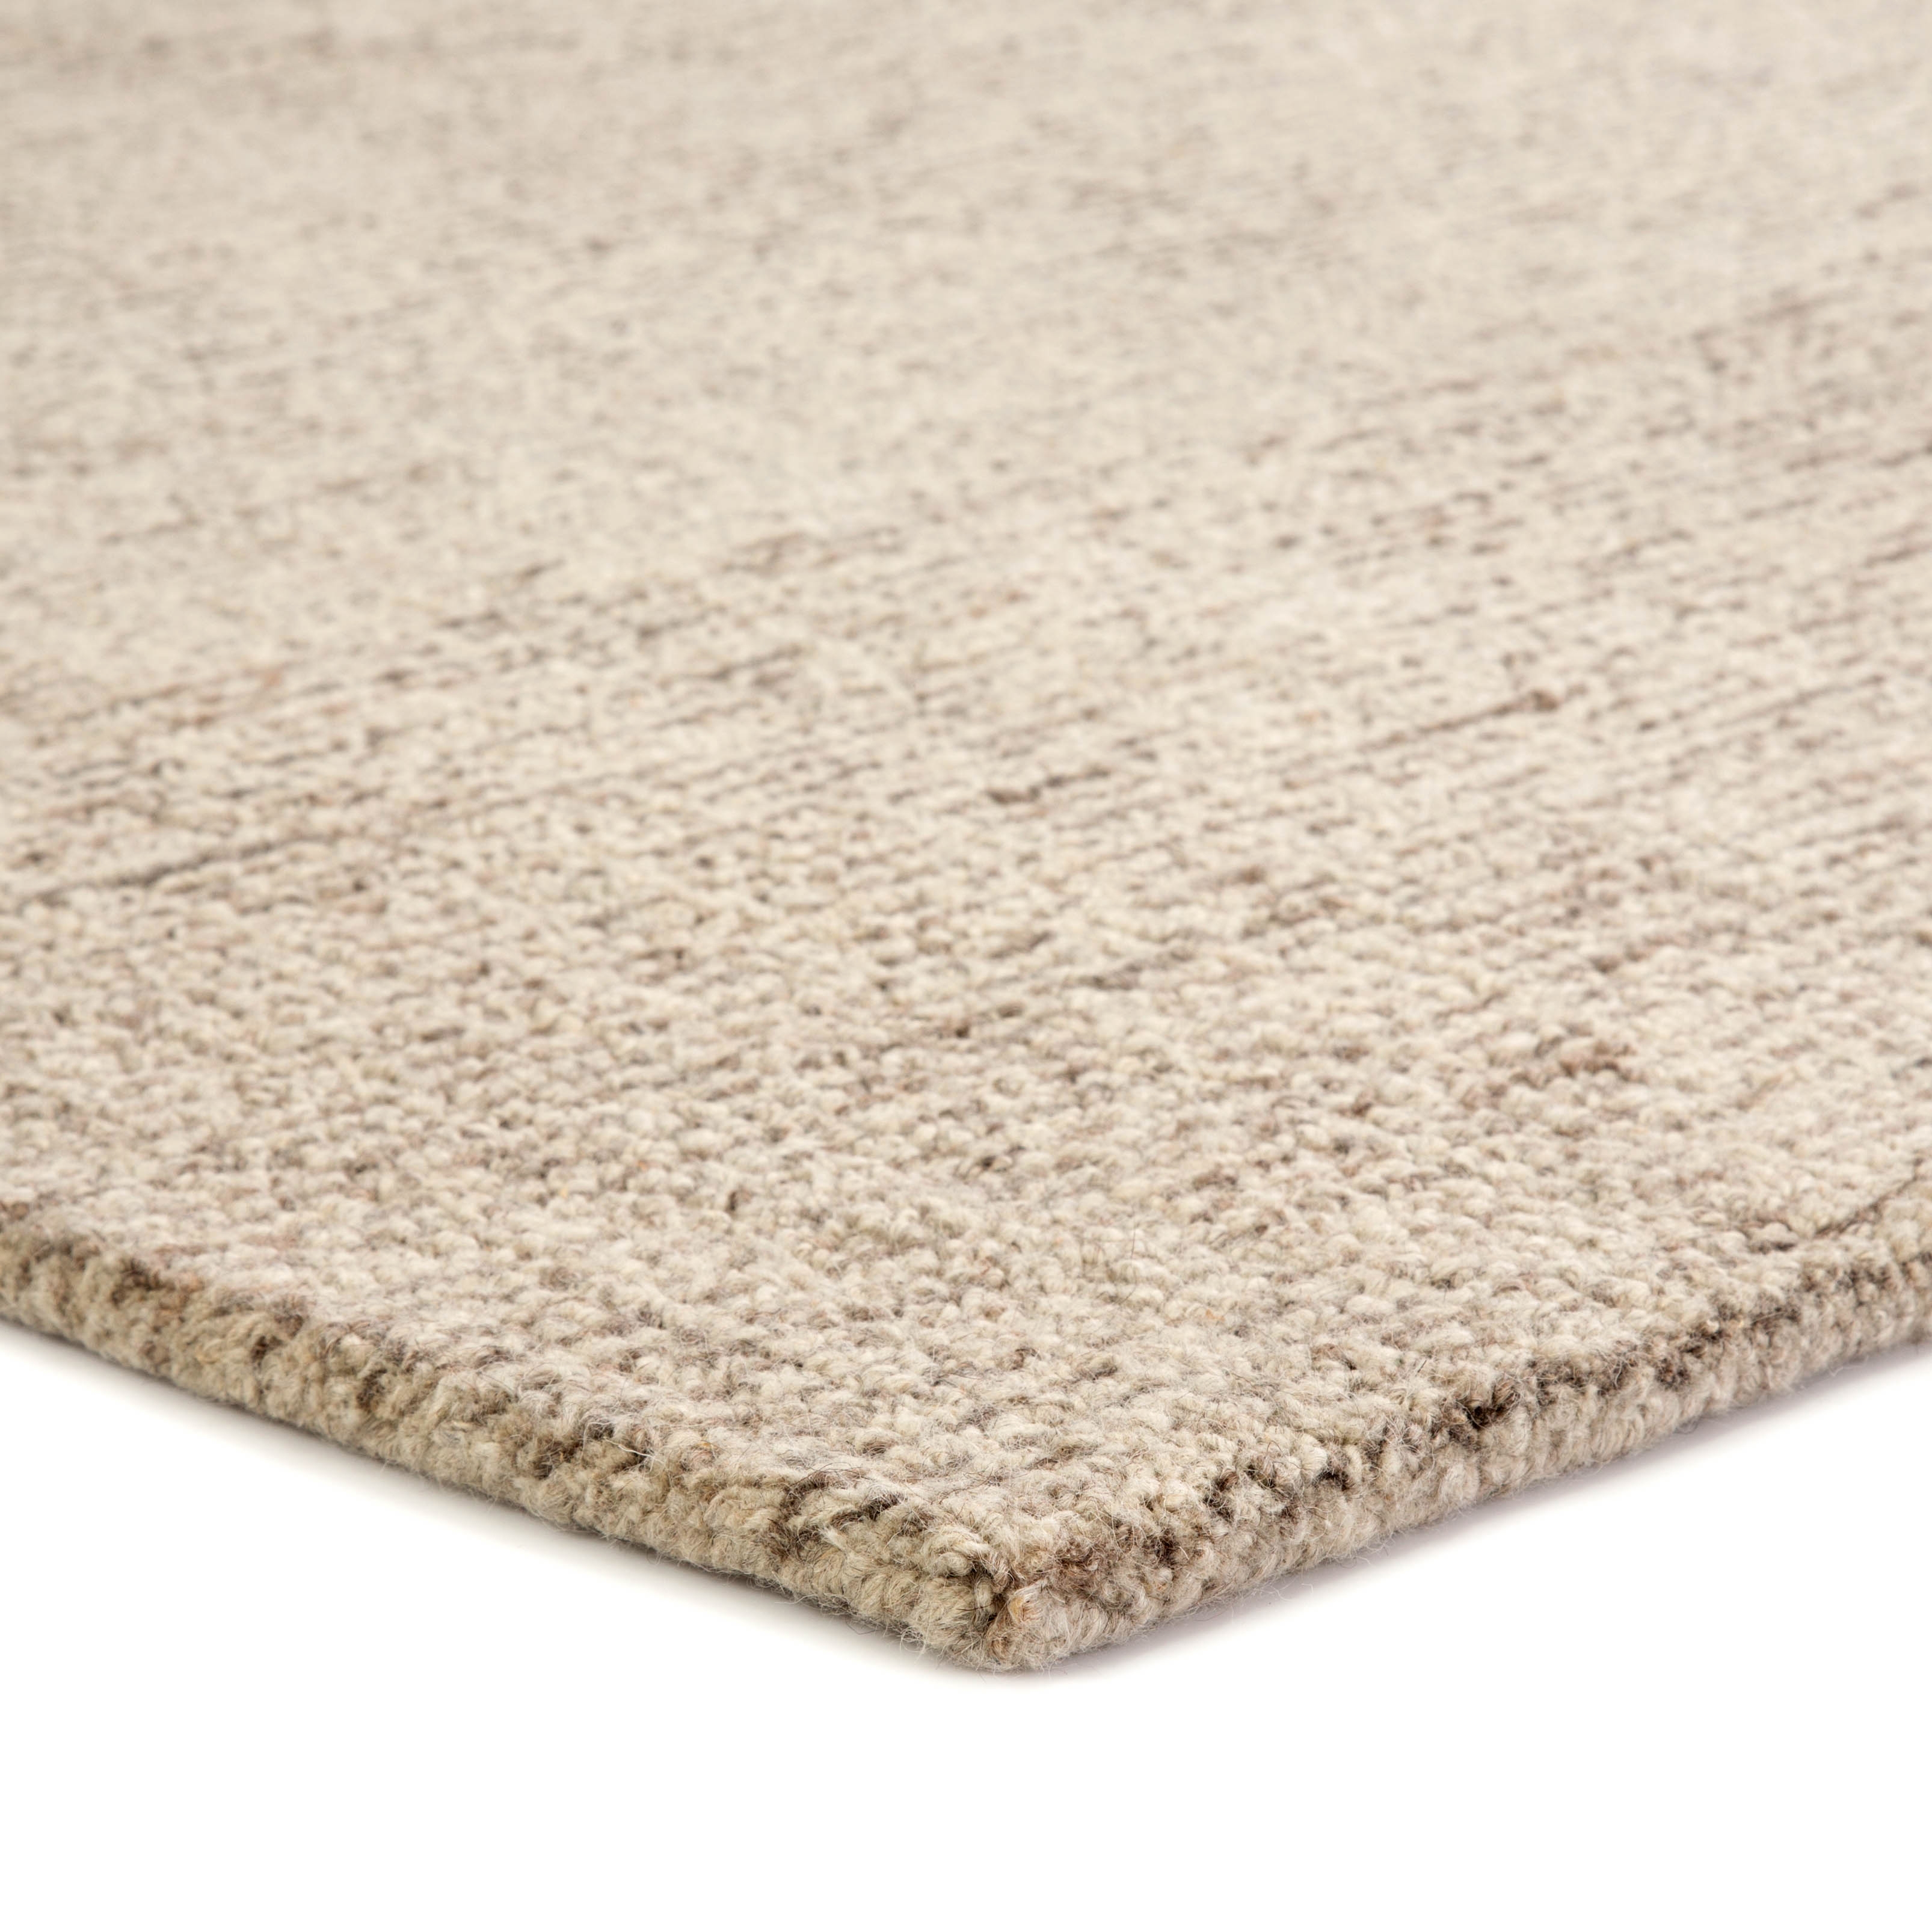 Oland Handmade Solid White/ Brown Area Rug (12'X15') - Image 1